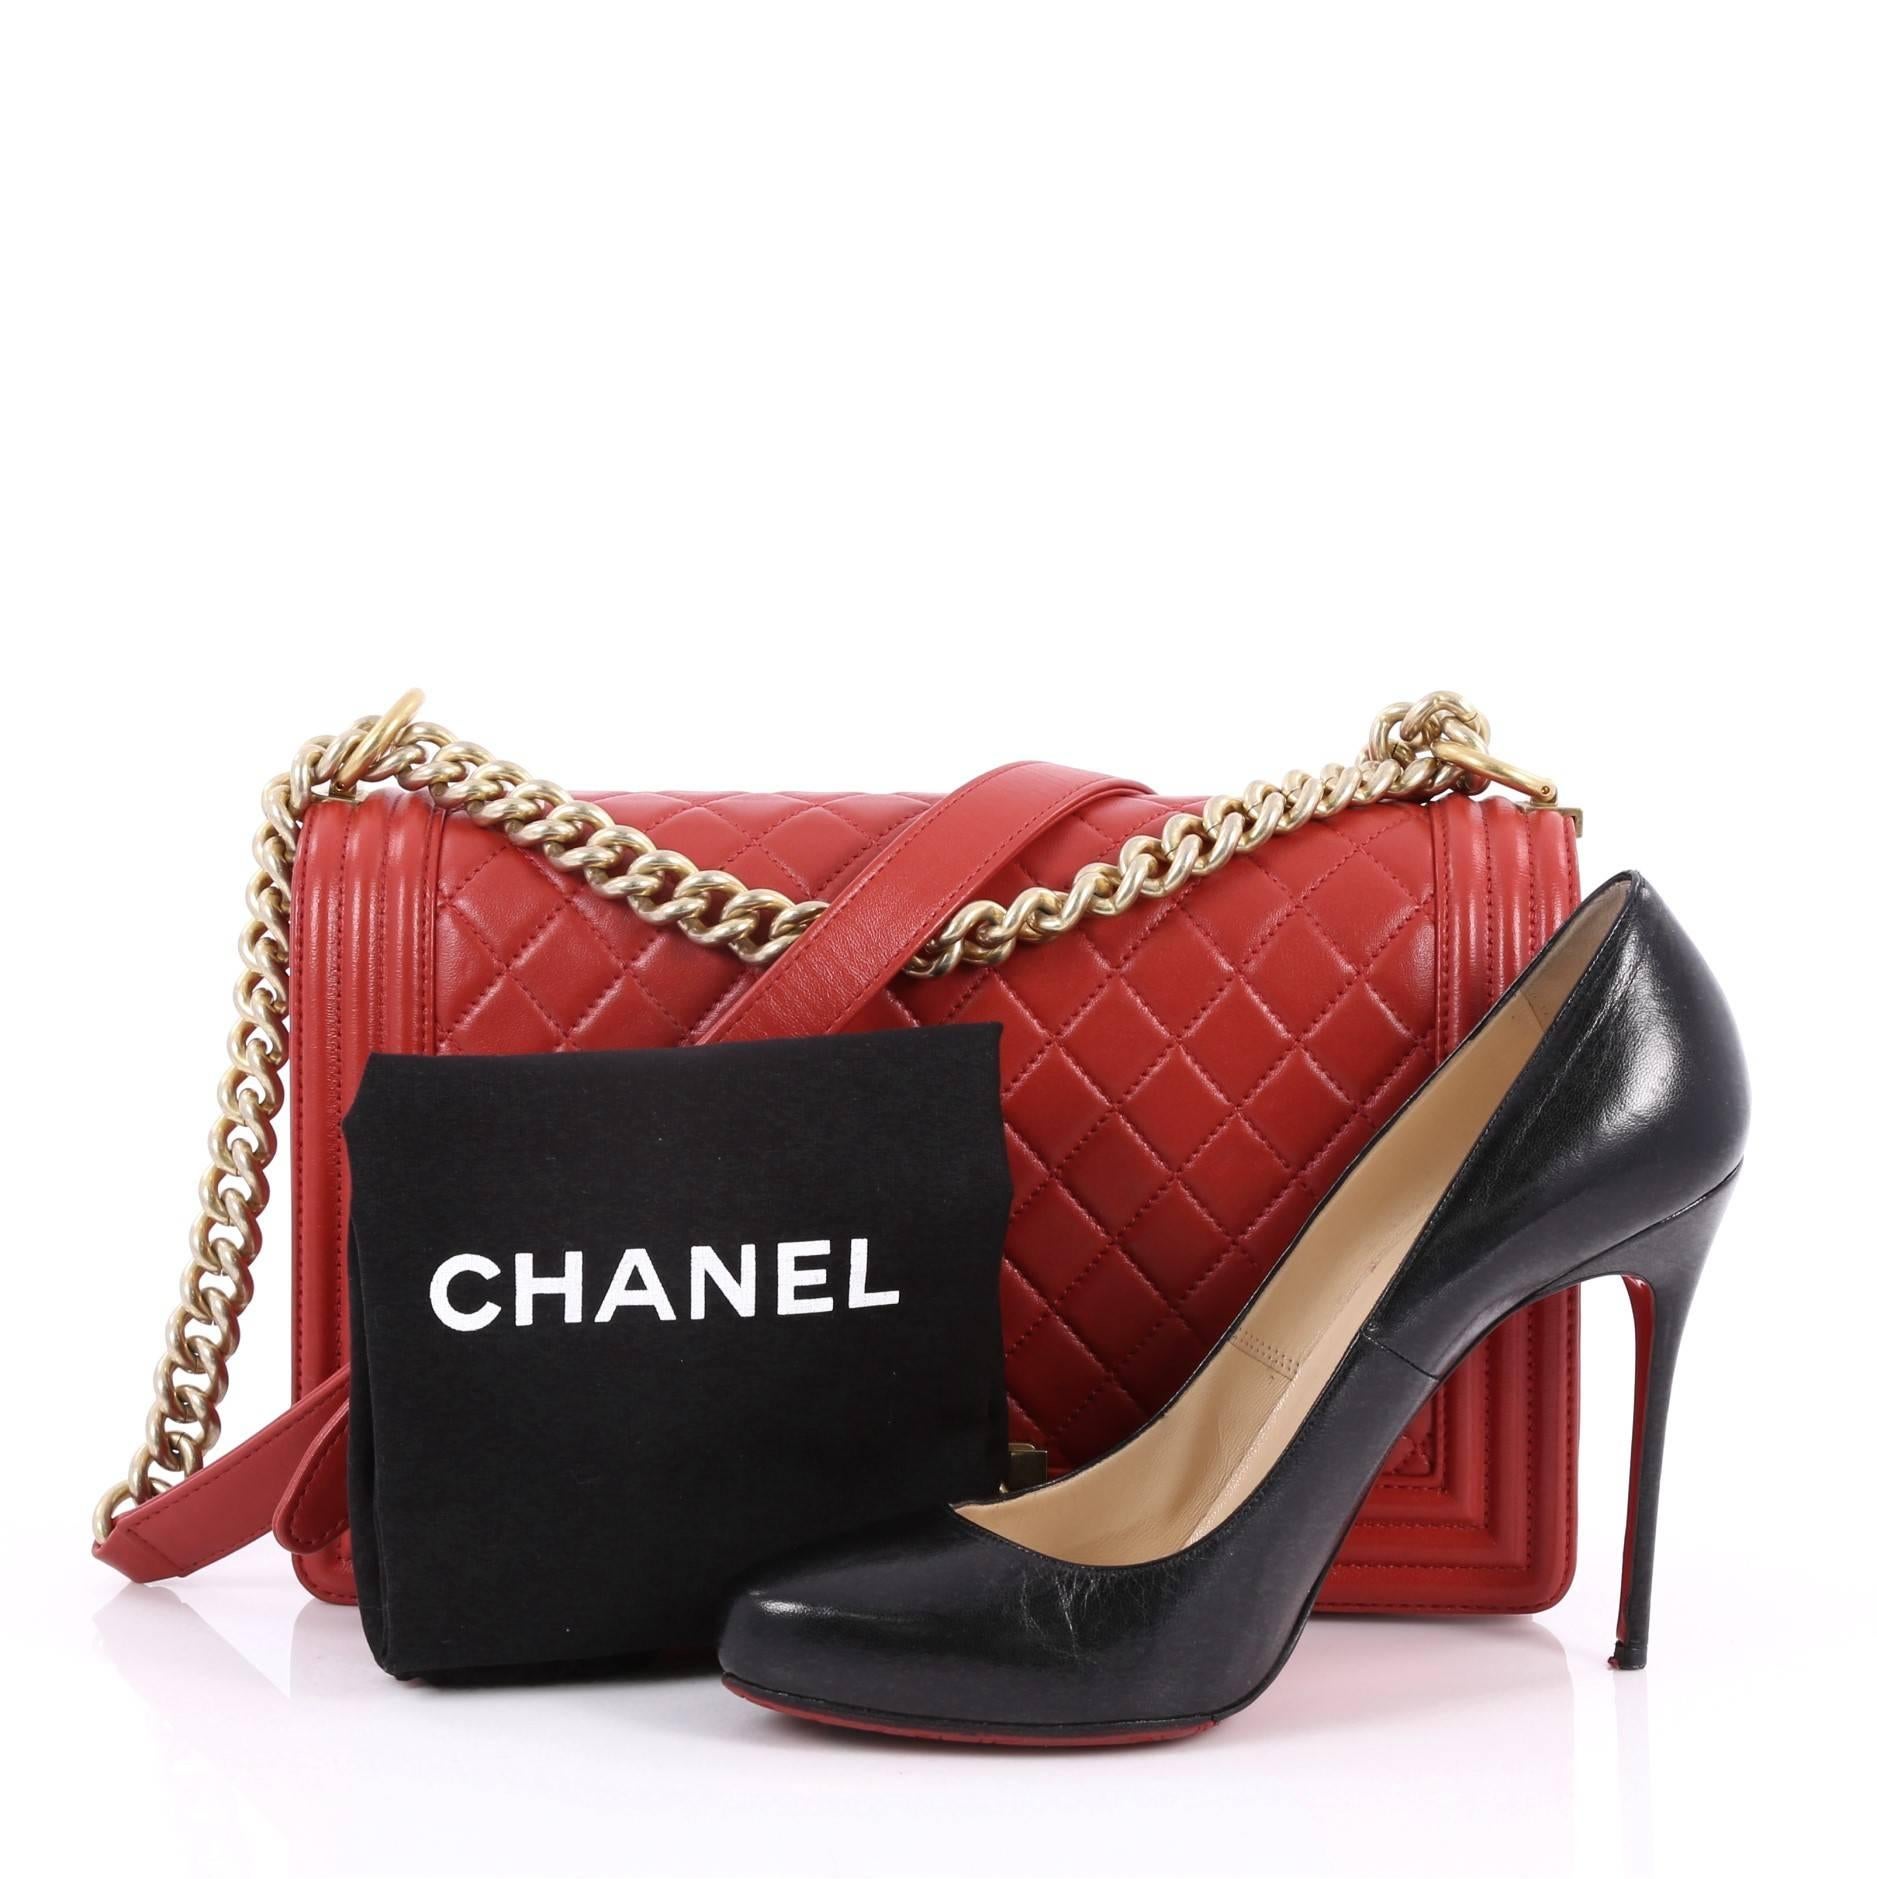 This authentic Chanel Boy Flap Bag Quilted Lambskin New Medium is every woman's dream. Crafted from red diamond quilted lambskin leather, this enviable Boy flap bag features a chunky chain link strap with shoulder pad, CC Boy logo push-lock closure,